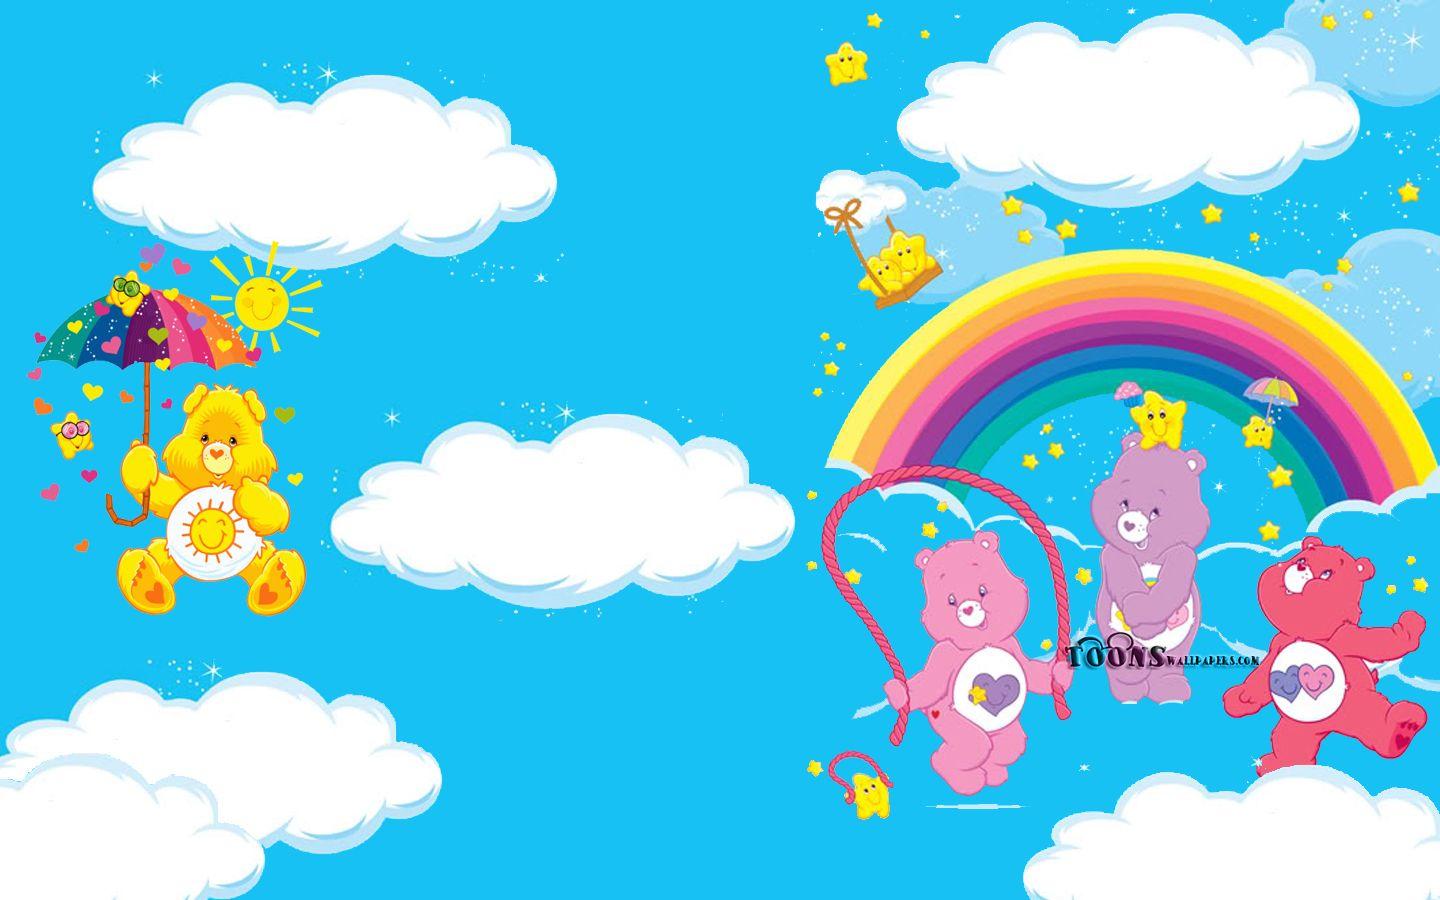 the care bears Wallpaper and Background Imagex900